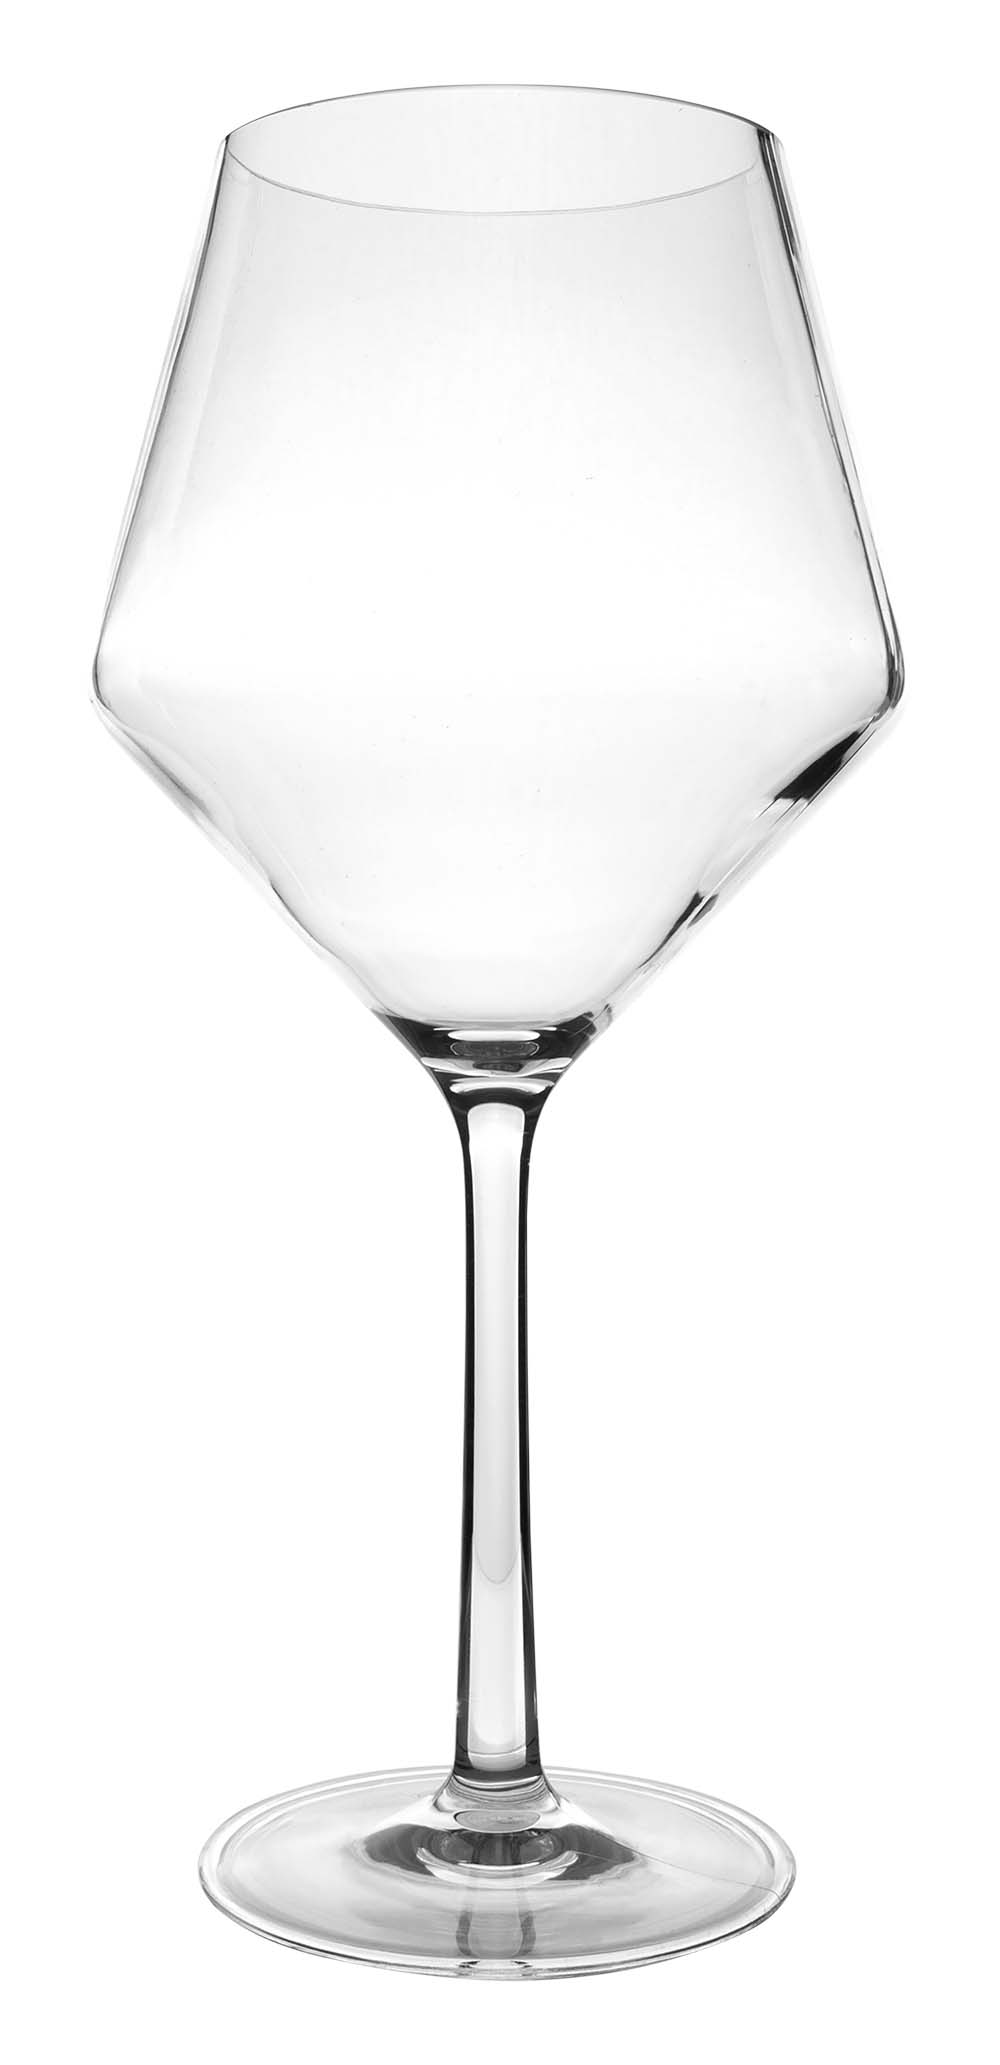 6101468 An almost unbreakable luxury red wine glass with a round and stylish design. Dishwasher safe, lightweight and even better scratch resistant. Made of strong tritan. A set of 2 glasses. The glasses are BPA free.